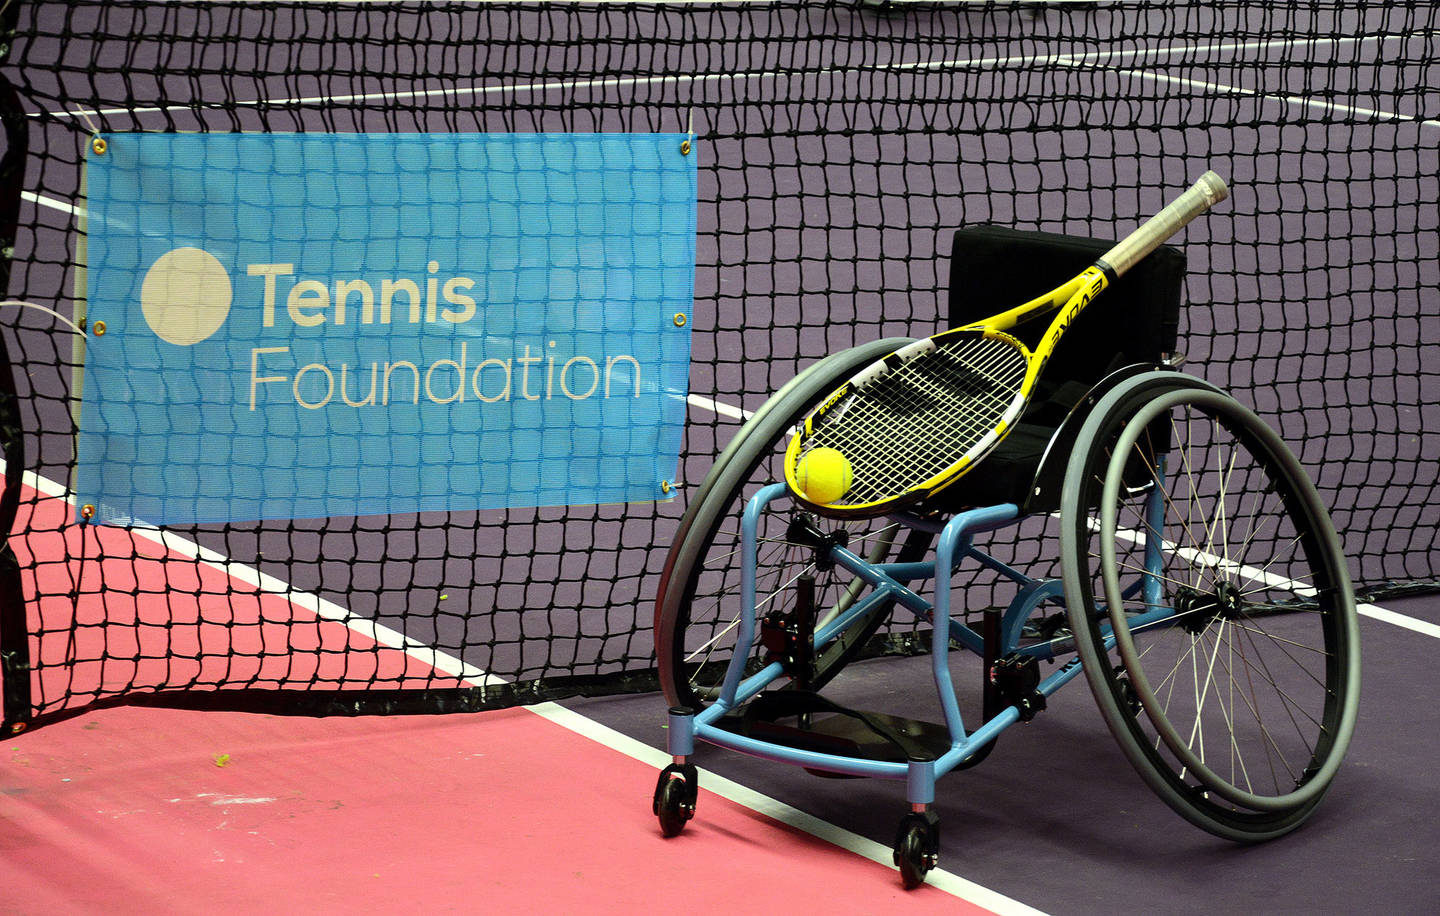 Tennis foundation logo on Tennis net, with a tennis racket and ball placed on a sports wheelchair. 